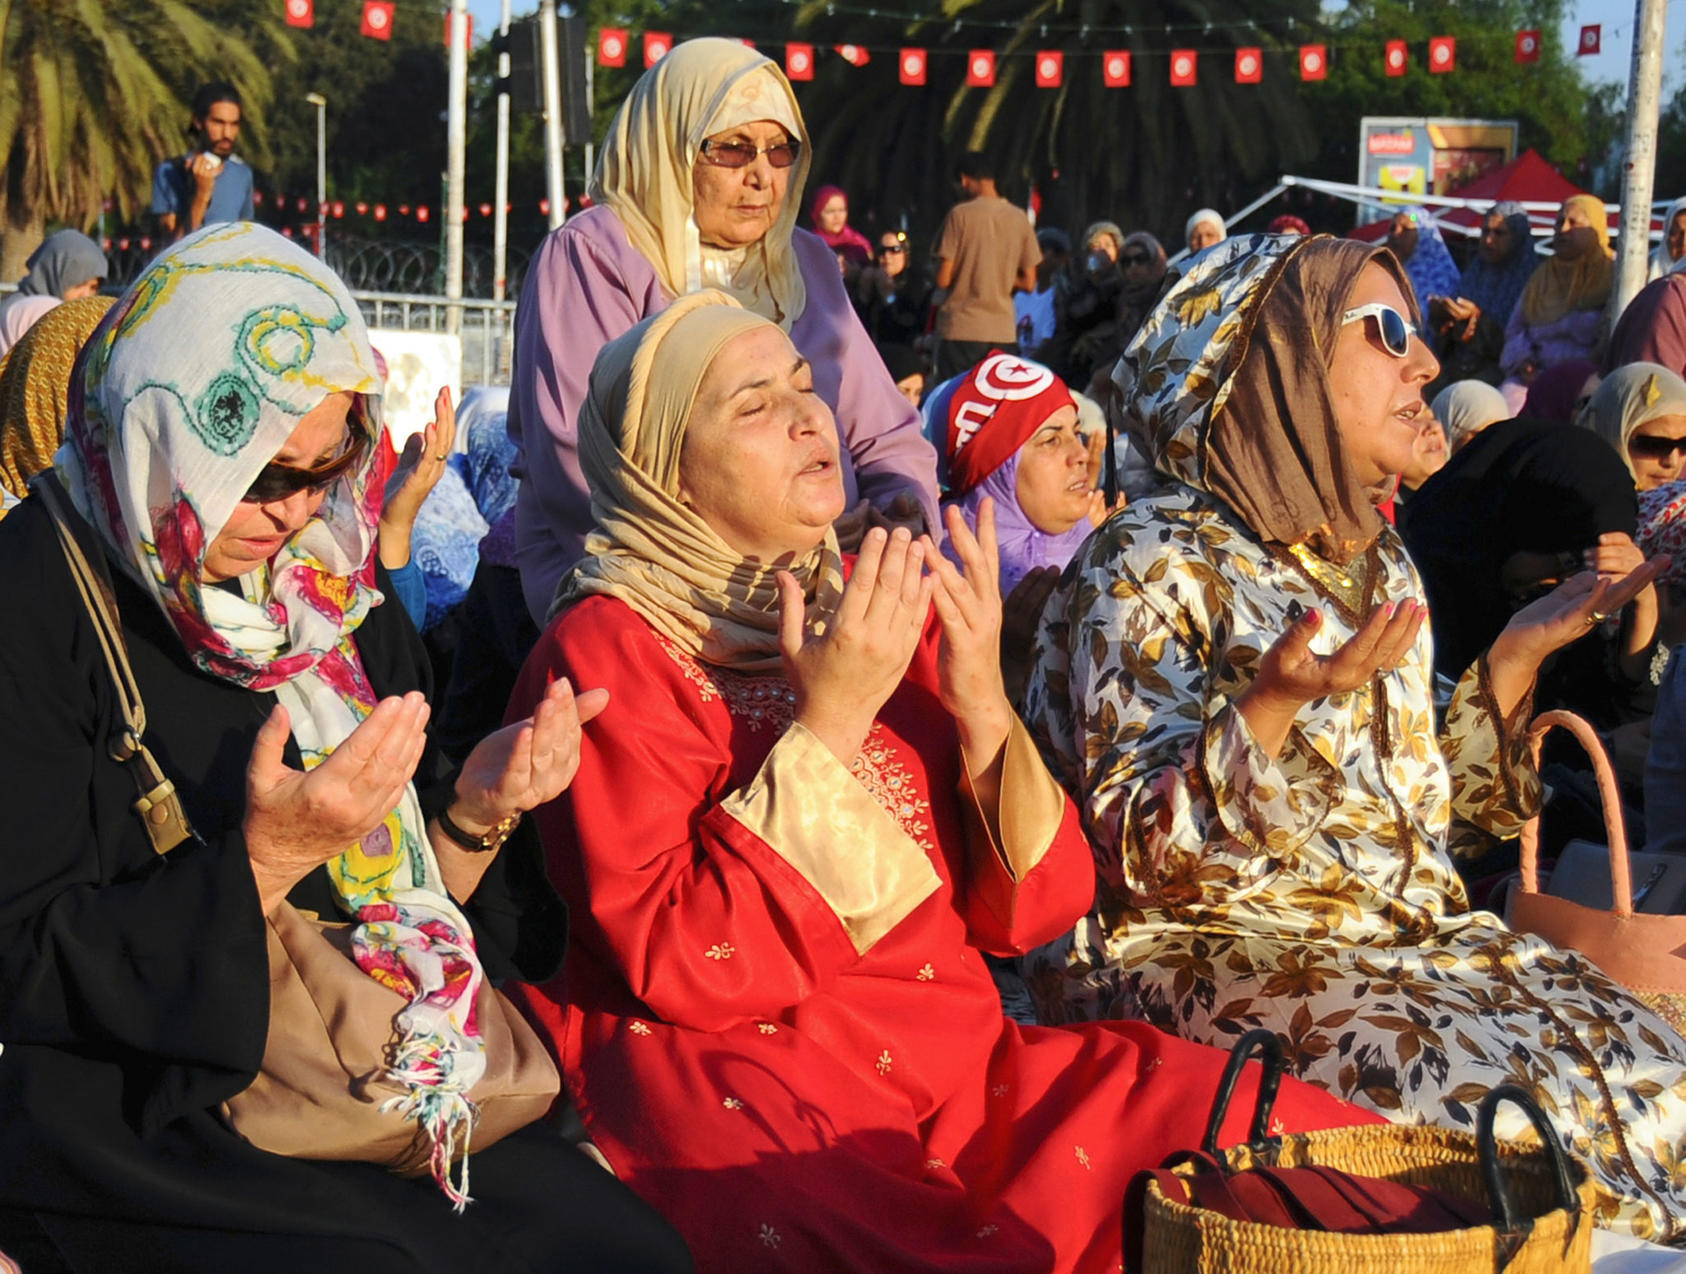 Women pray near the Zitouna Mosque in Tunis during the Eid al-Fitr holiday, marking the end of Ramadan, on August 8, 2013. (Photo by Hassene Dridi/AP)